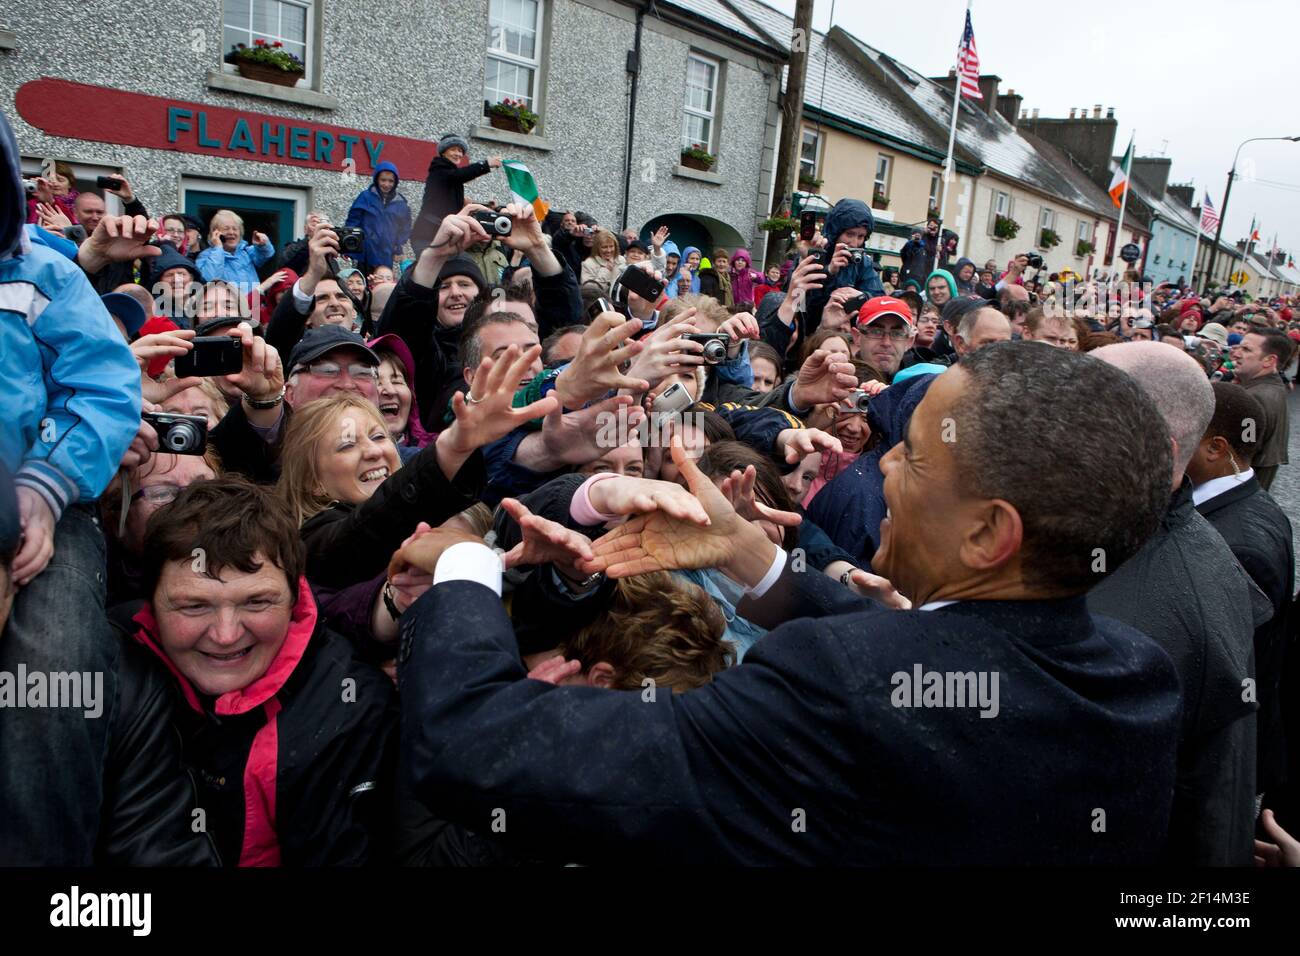 President Barack Obama greets people on Main Street in Moneygall Ireland May 23 2011. Stock Photo